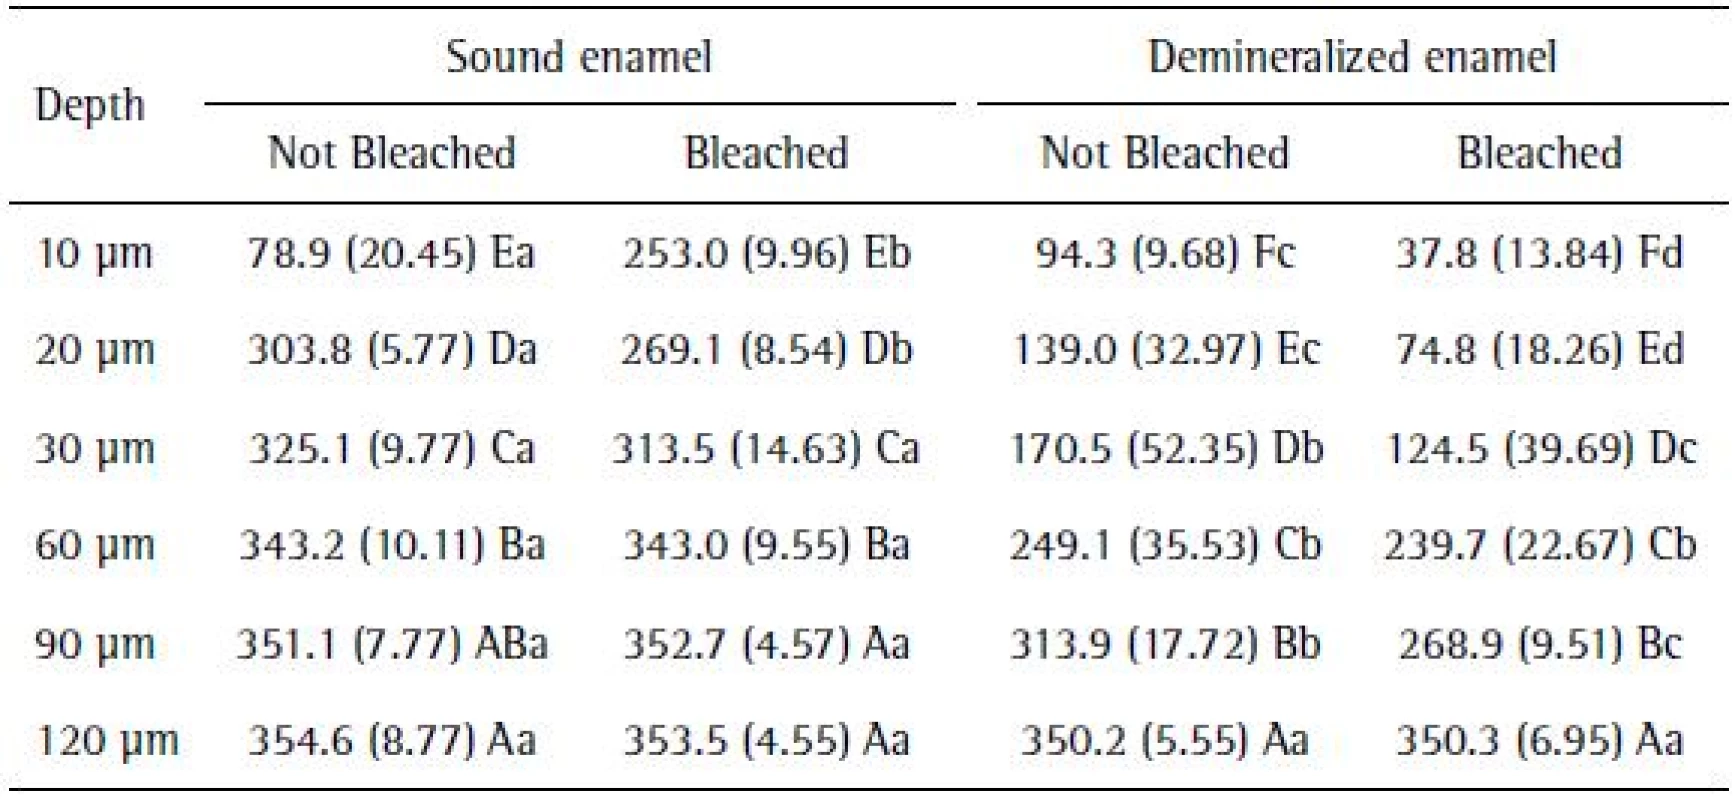 Mean (SD) cross-sectional hardness before and after tooth whitening in sound and demineralized enamel, according to different depths